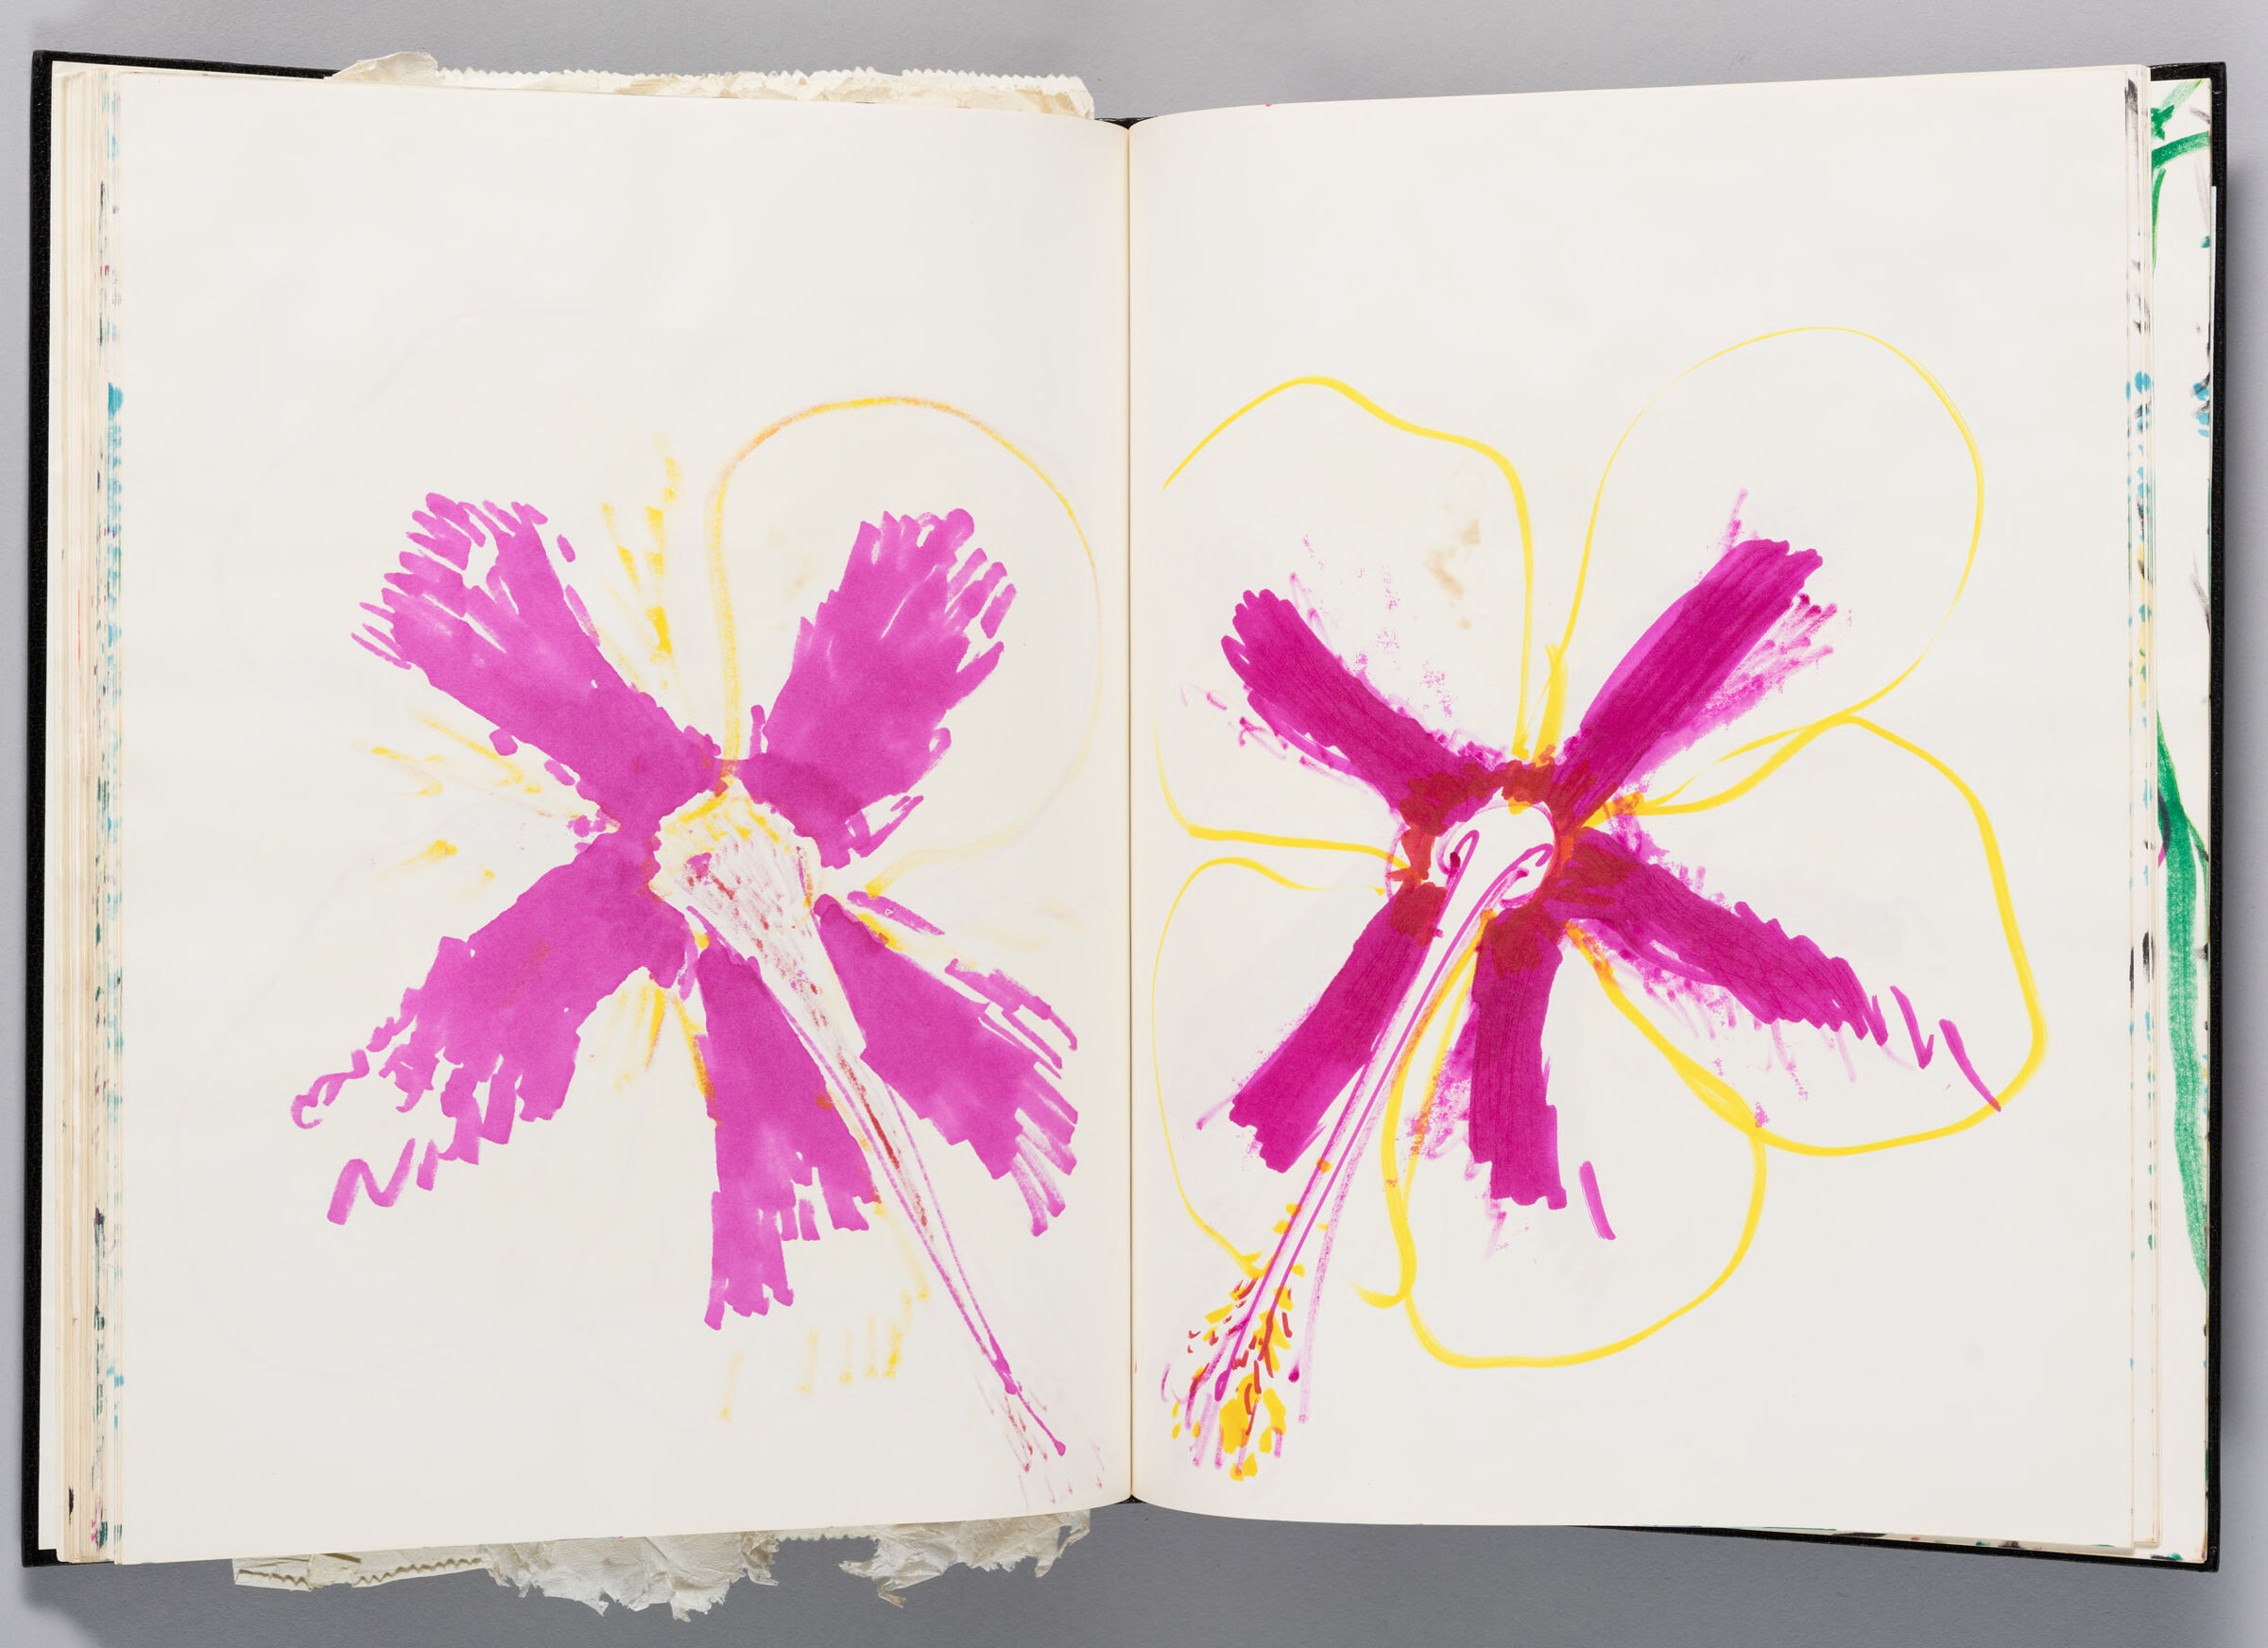 Untitled (Bleed-Through Of Previous Page, Left Page); Untitled (Hibiscus Flower, Right Page)
